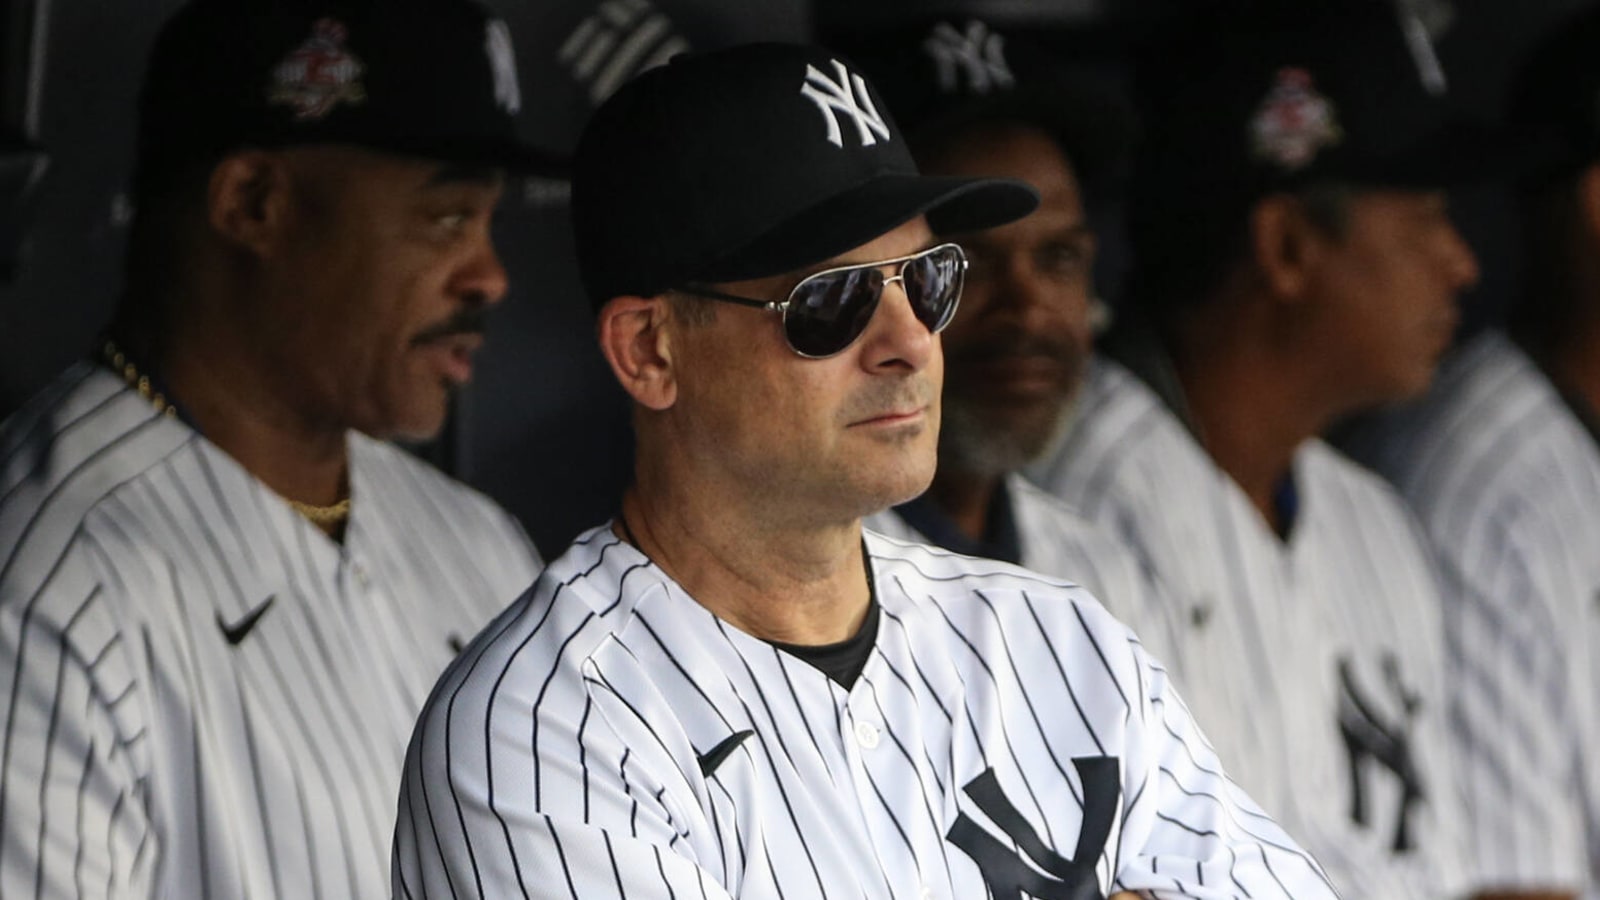 New York Yankees Announce 2023 Patriots Manager, Coaches & Staff